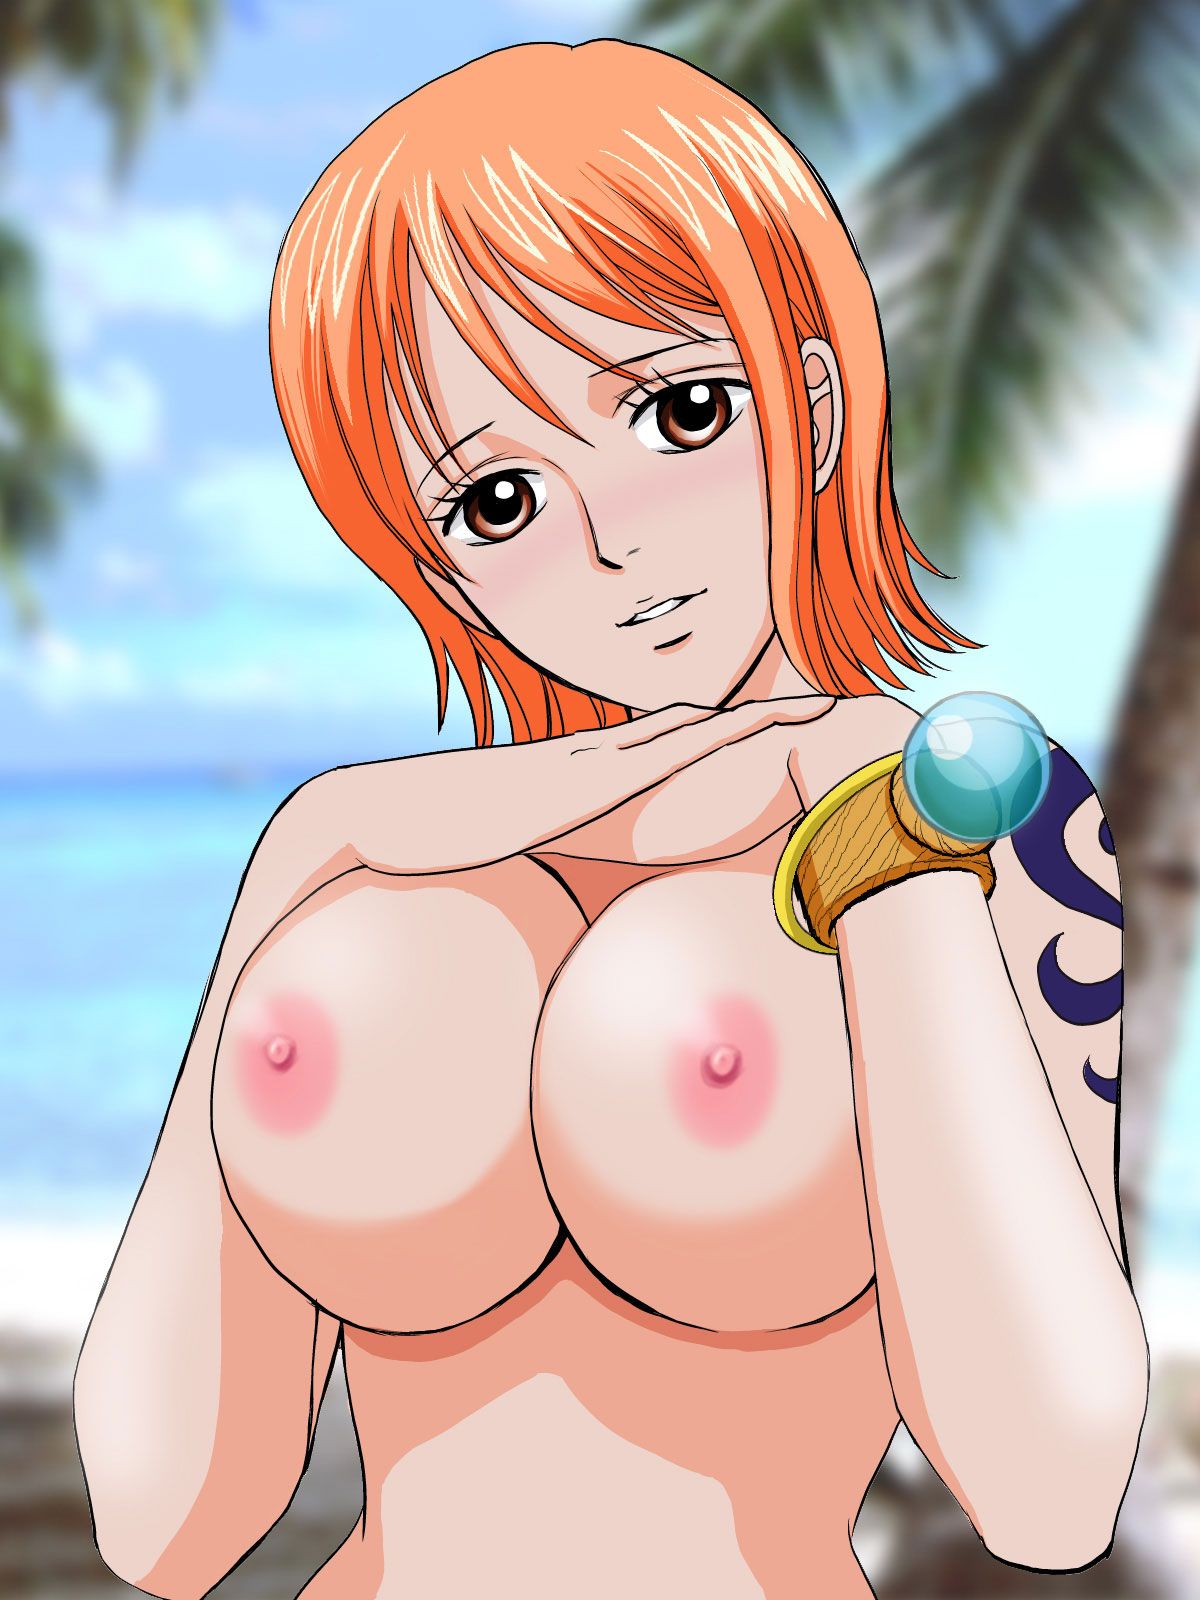 best one piece images on pinterest one piece anime girls and cartoon 1